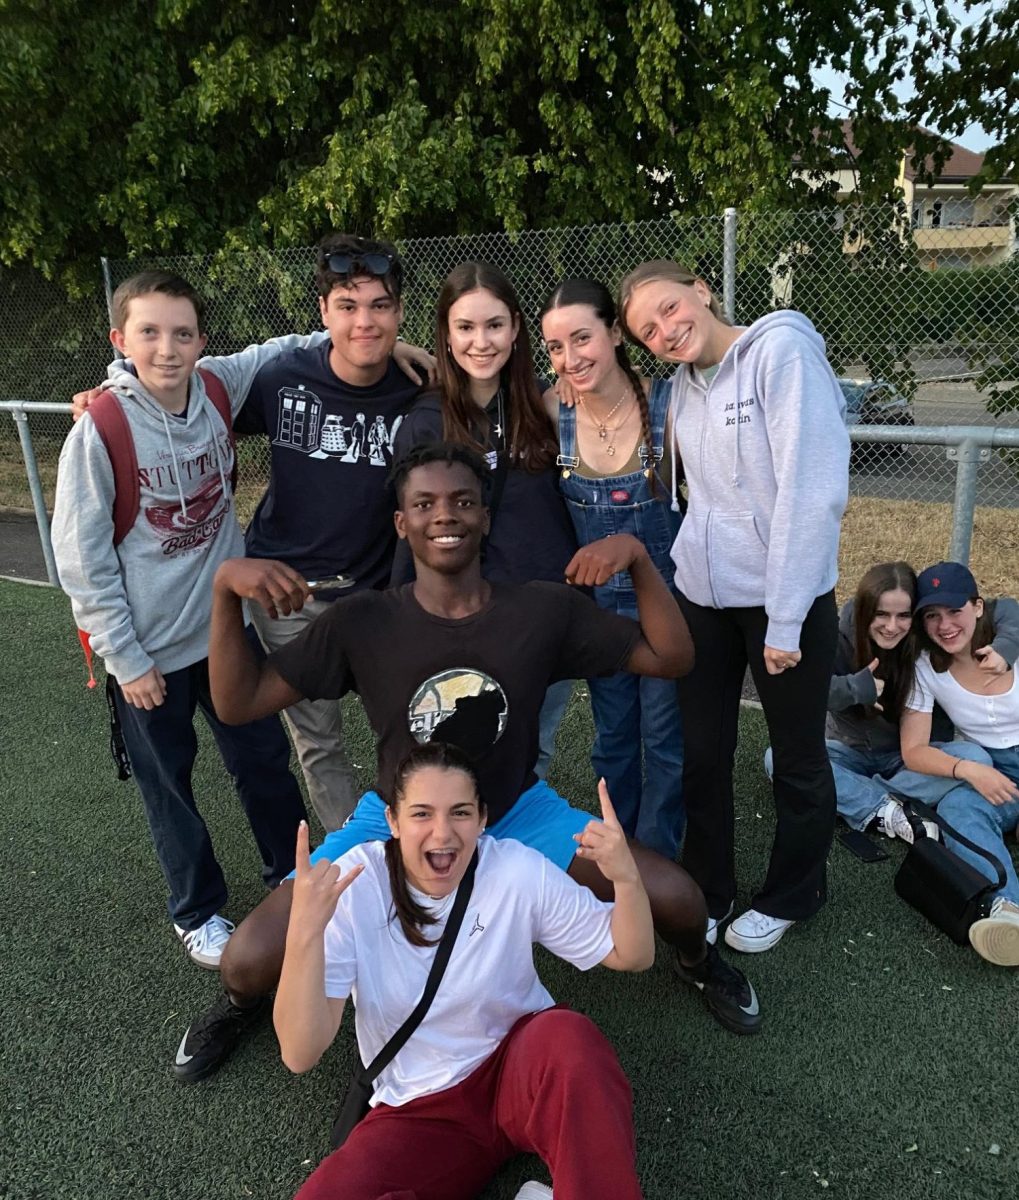 American and German students enjoying a soccer game on their last night together.